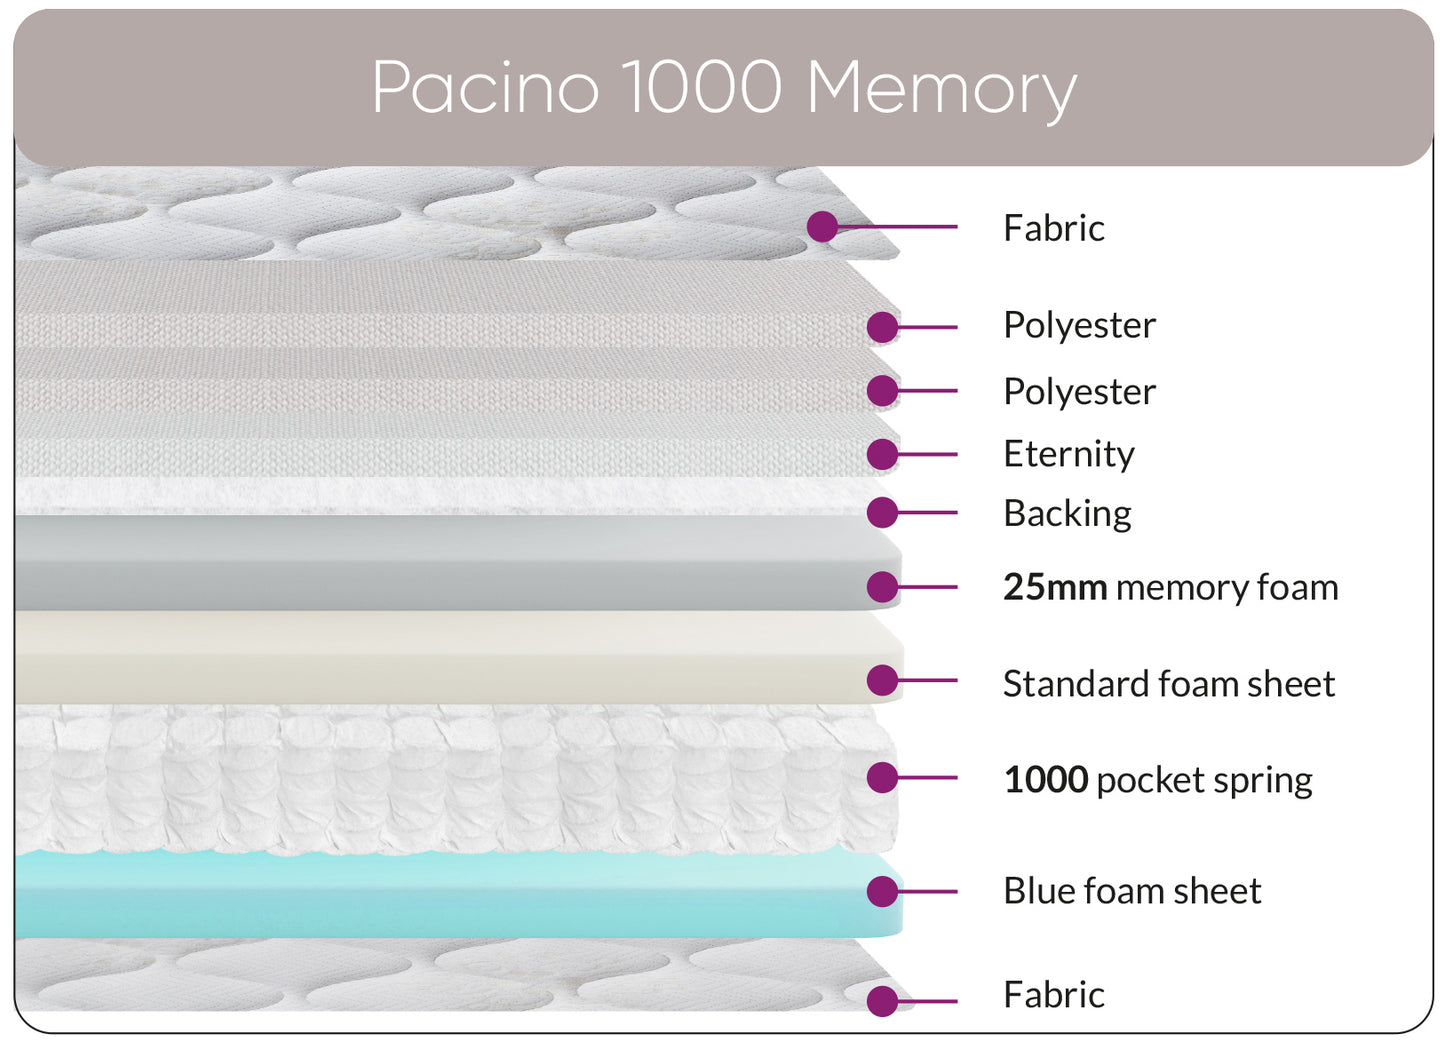 Pacino foam encapsulated hybrid mattress. Fast delivery.